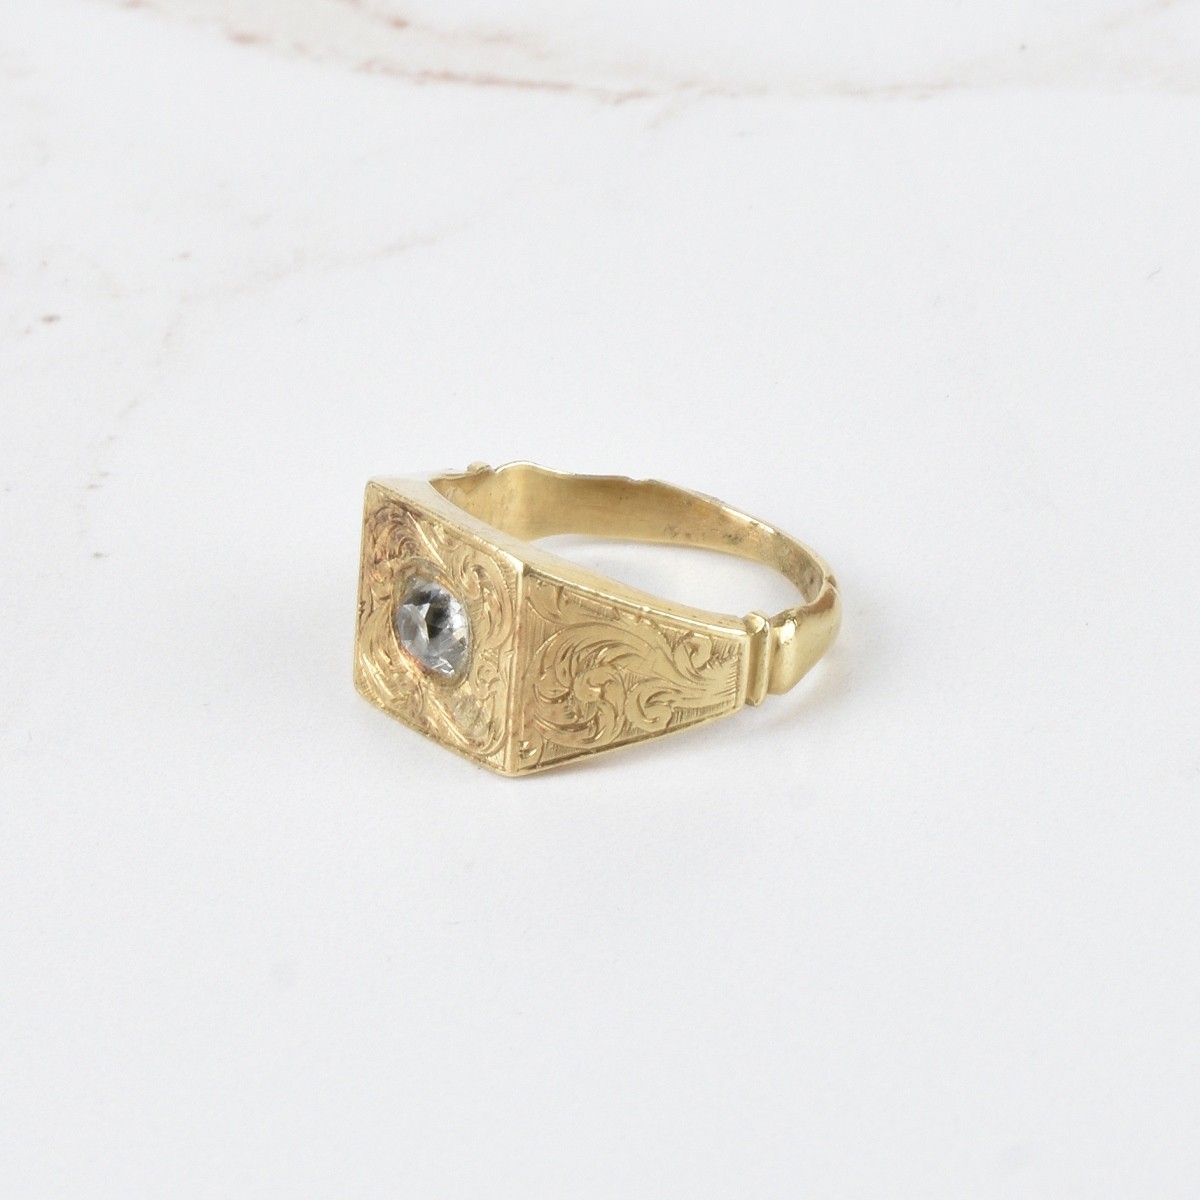 Antique Diamond and 14K Ring